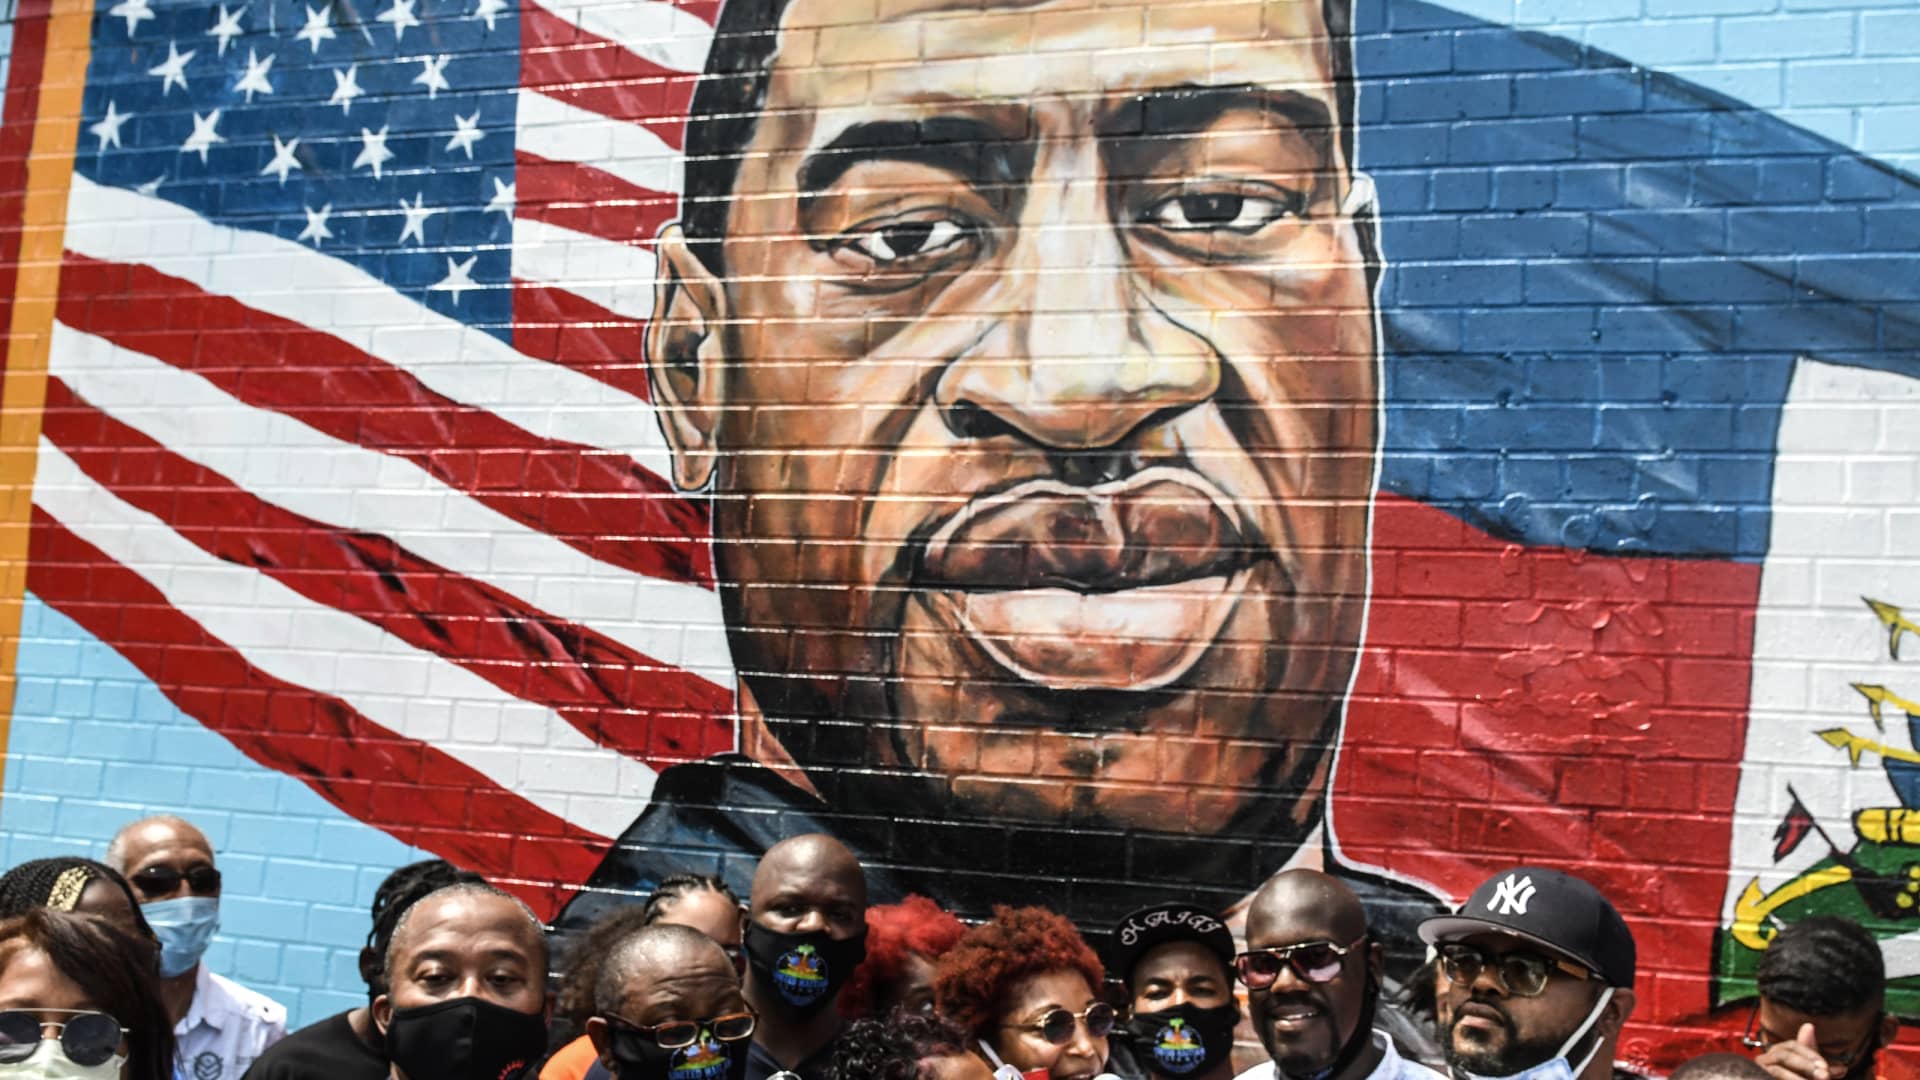 Terrance Floyd (R), the brother of George Floyd, attends a unveiling of a mural painted by artist Kenny Altidor depicting George Floyd on a sidewall of CTown Supermarket on July 13, 2020 in Brooklyn, New York City.